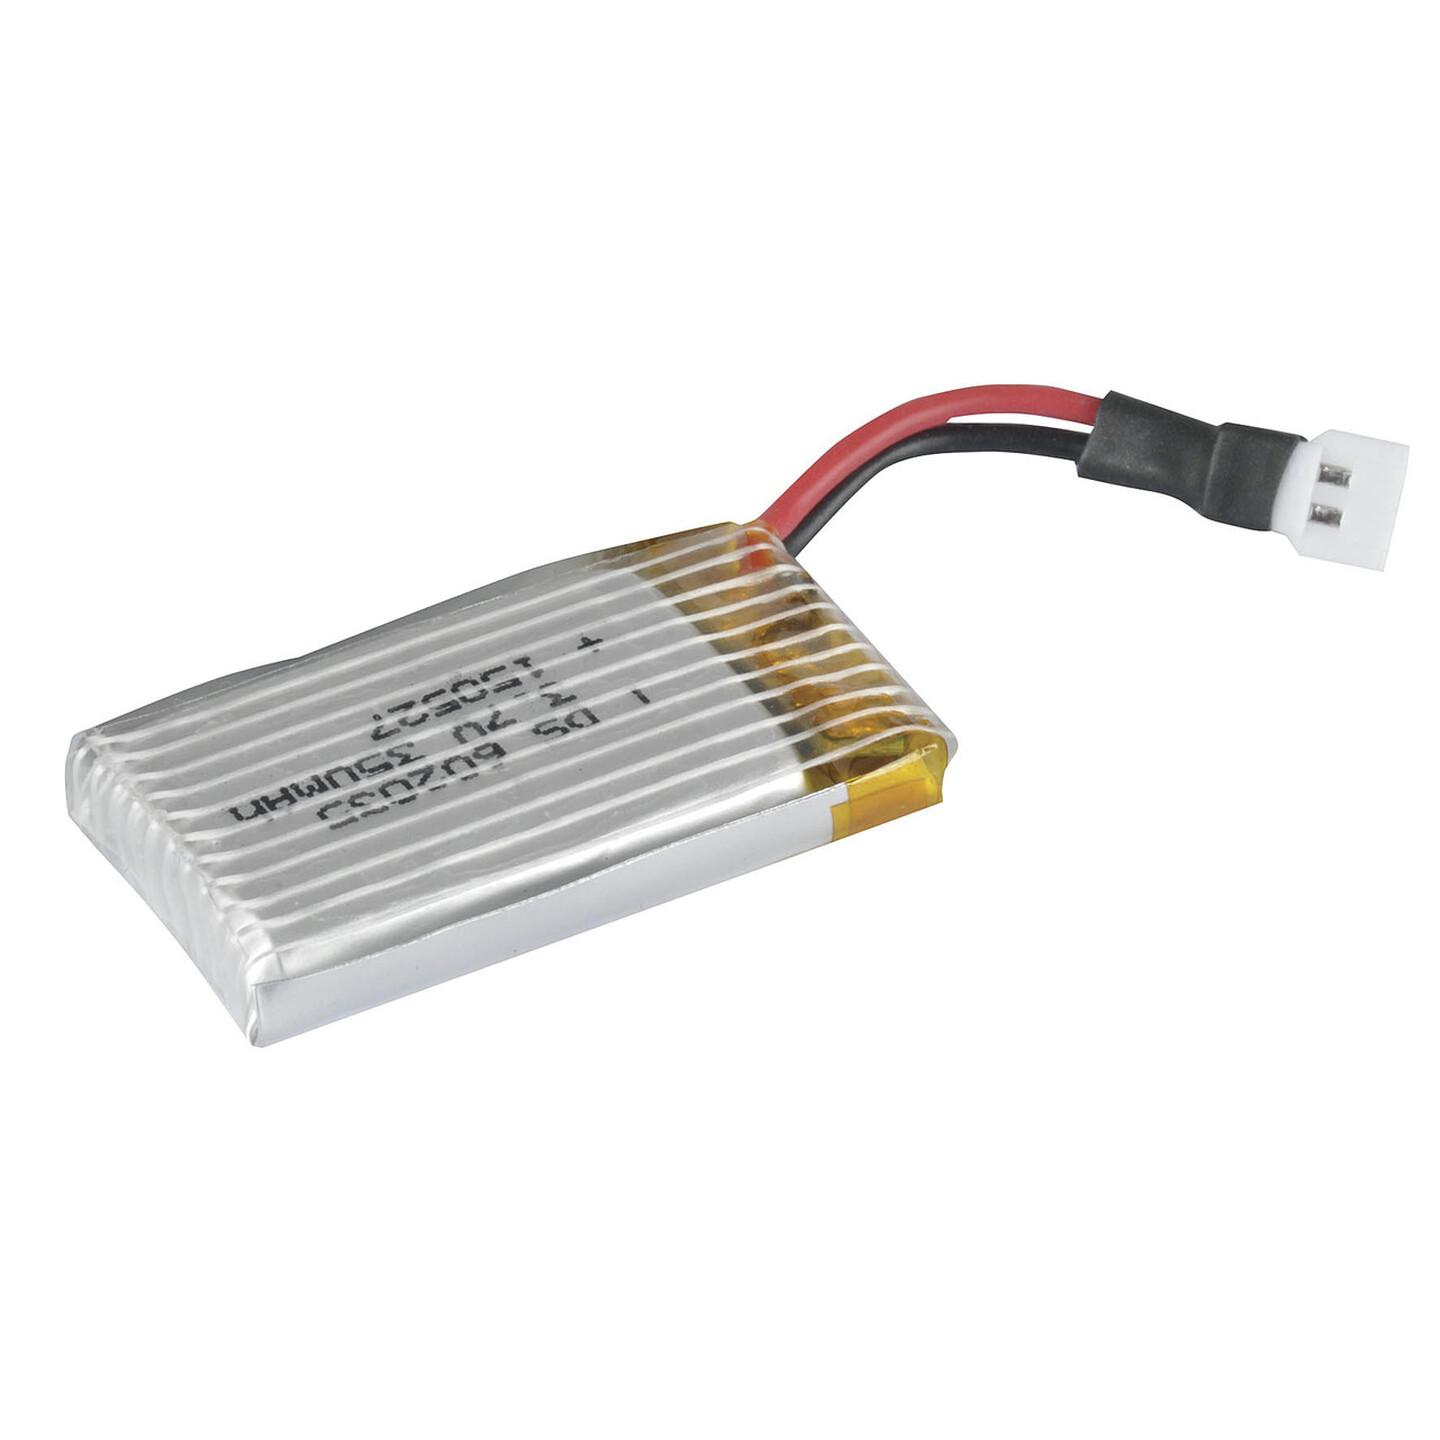 Spare Li-ion Battery Pack to suit GT-4110 Quadcopter